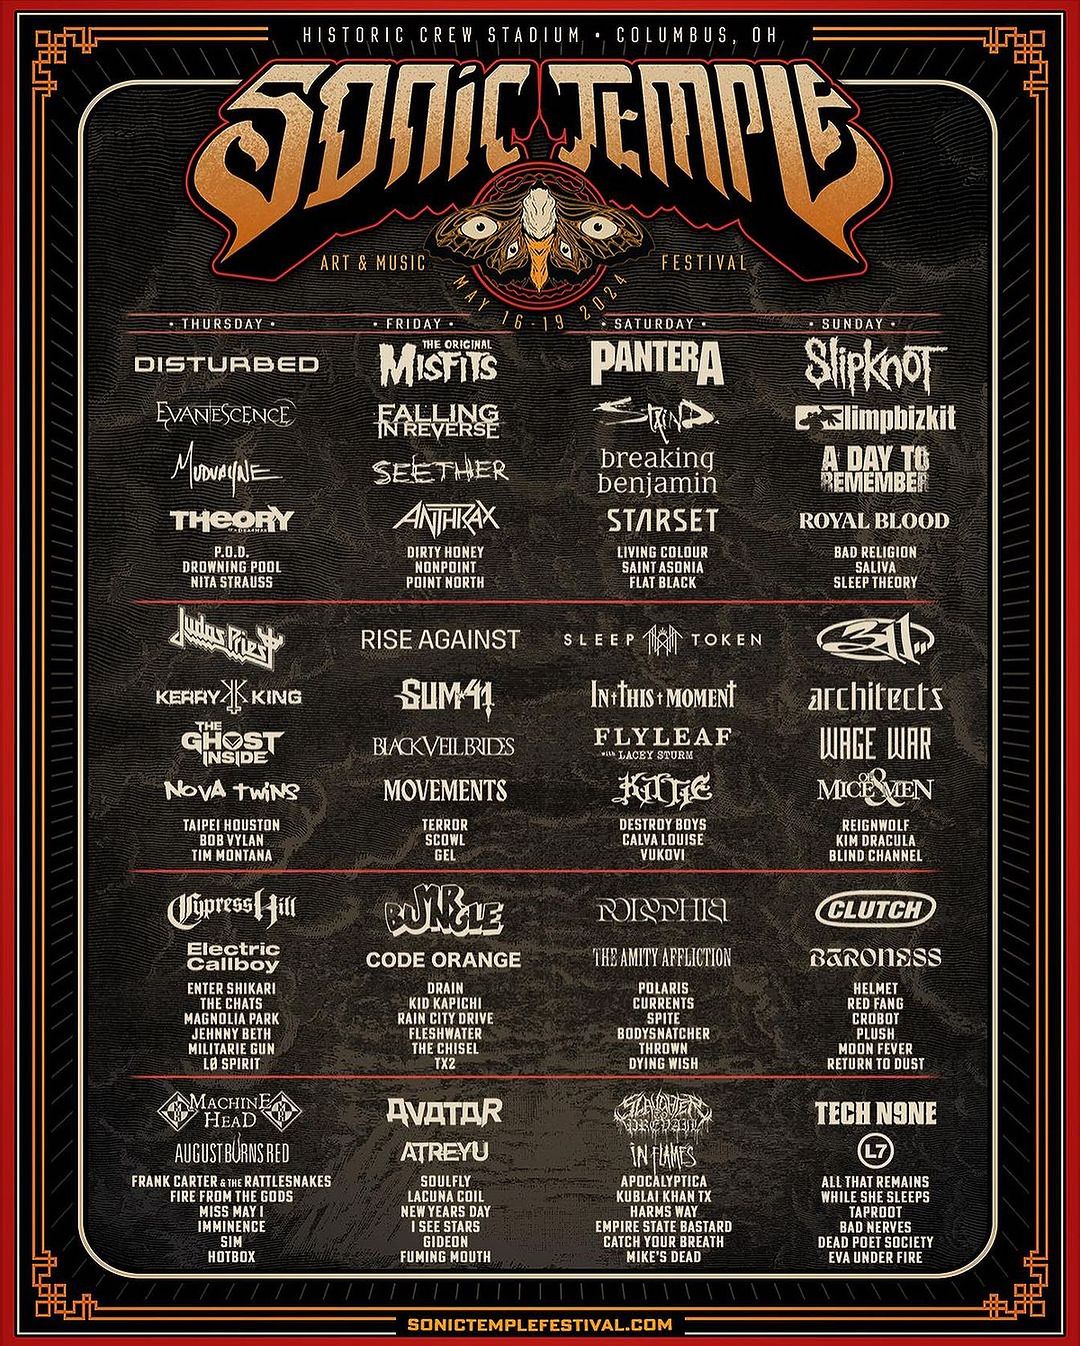 Columbus OH! We can’t wait to see you at Sonic Temple Festival Sunday, May 19th!